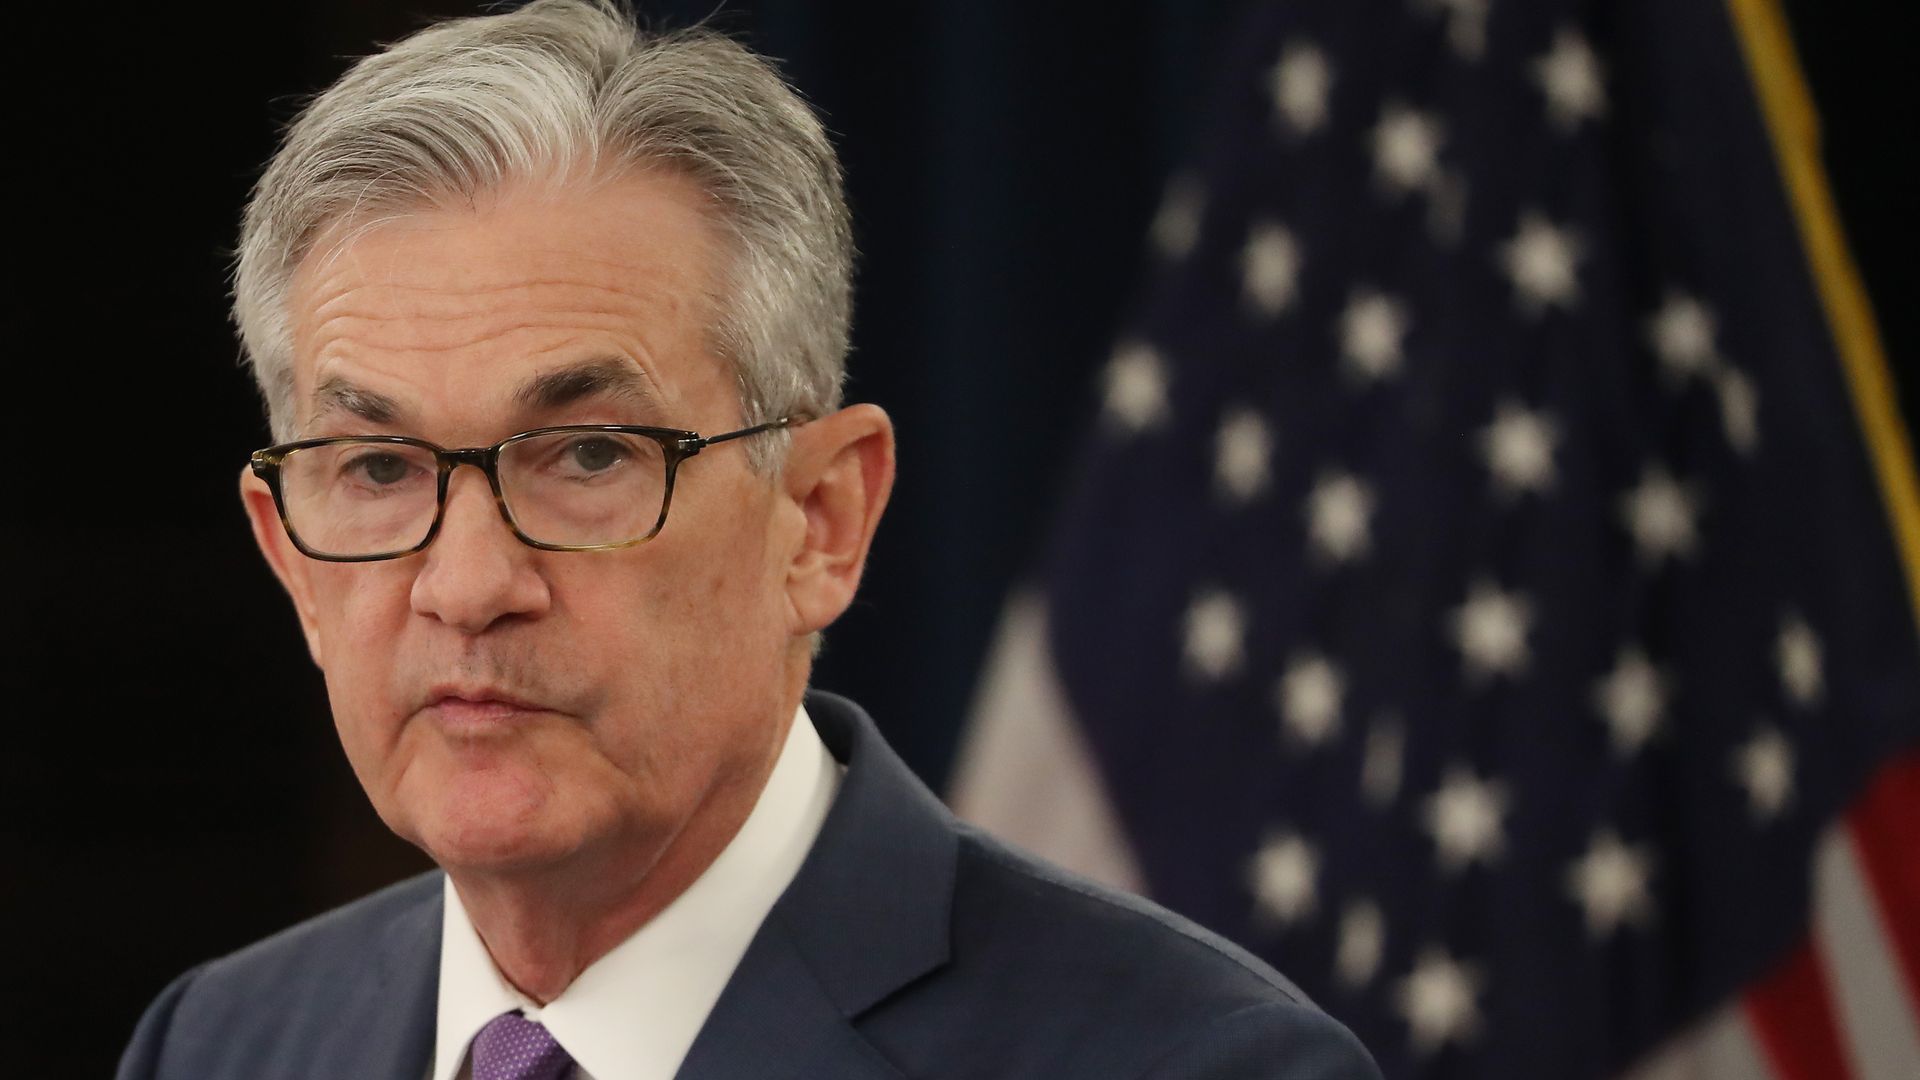 Federal Reserve Board Chairman Jerome Powell speaks during a news conference in July